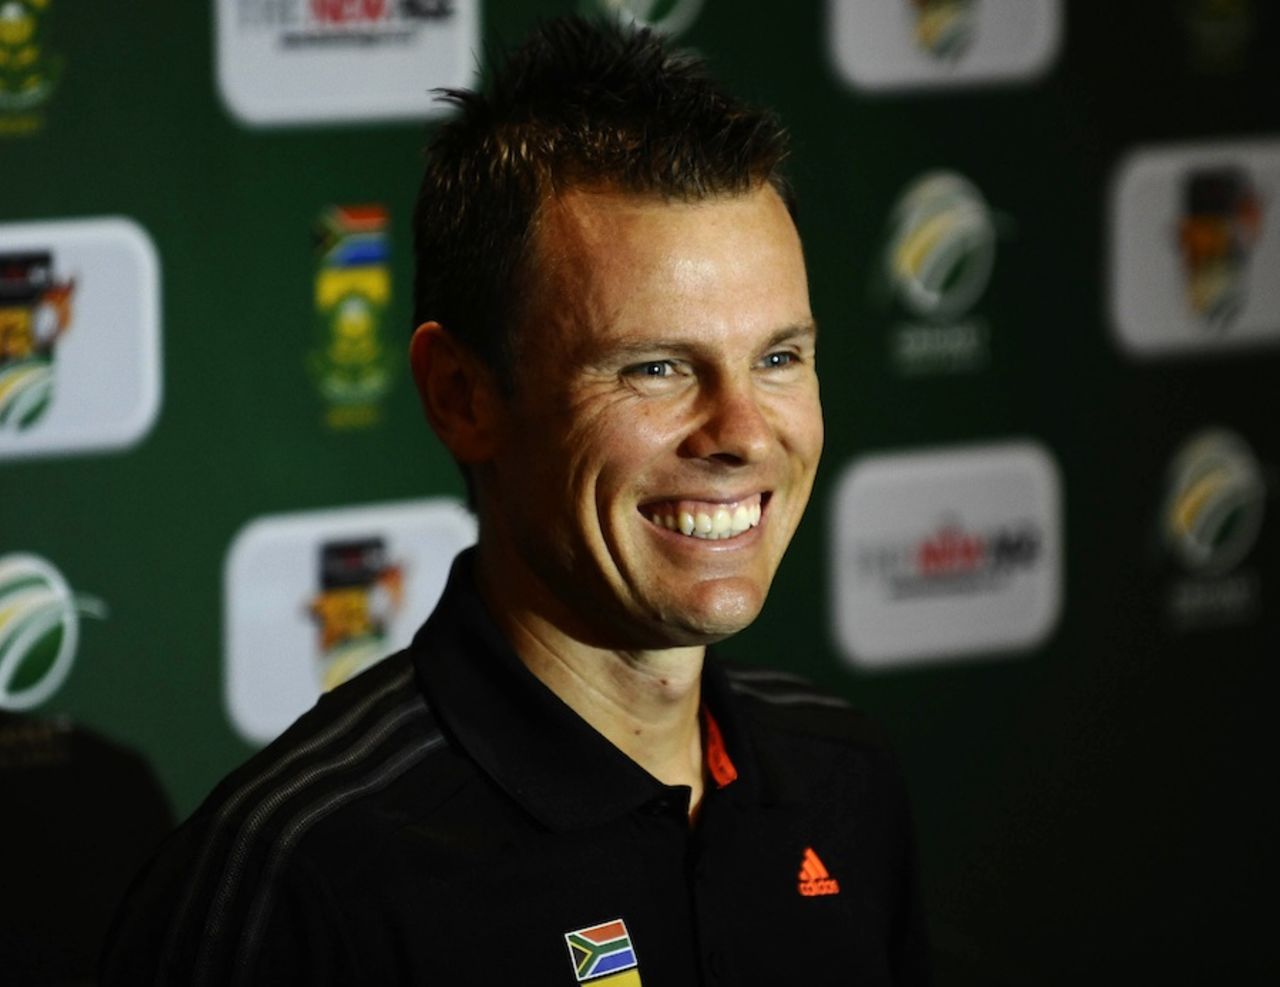 Johan Botha, South Africa's stand-in Twenty20 captain, at a press conference on the eve of the game against India, Johannesburg, March 29, 2012